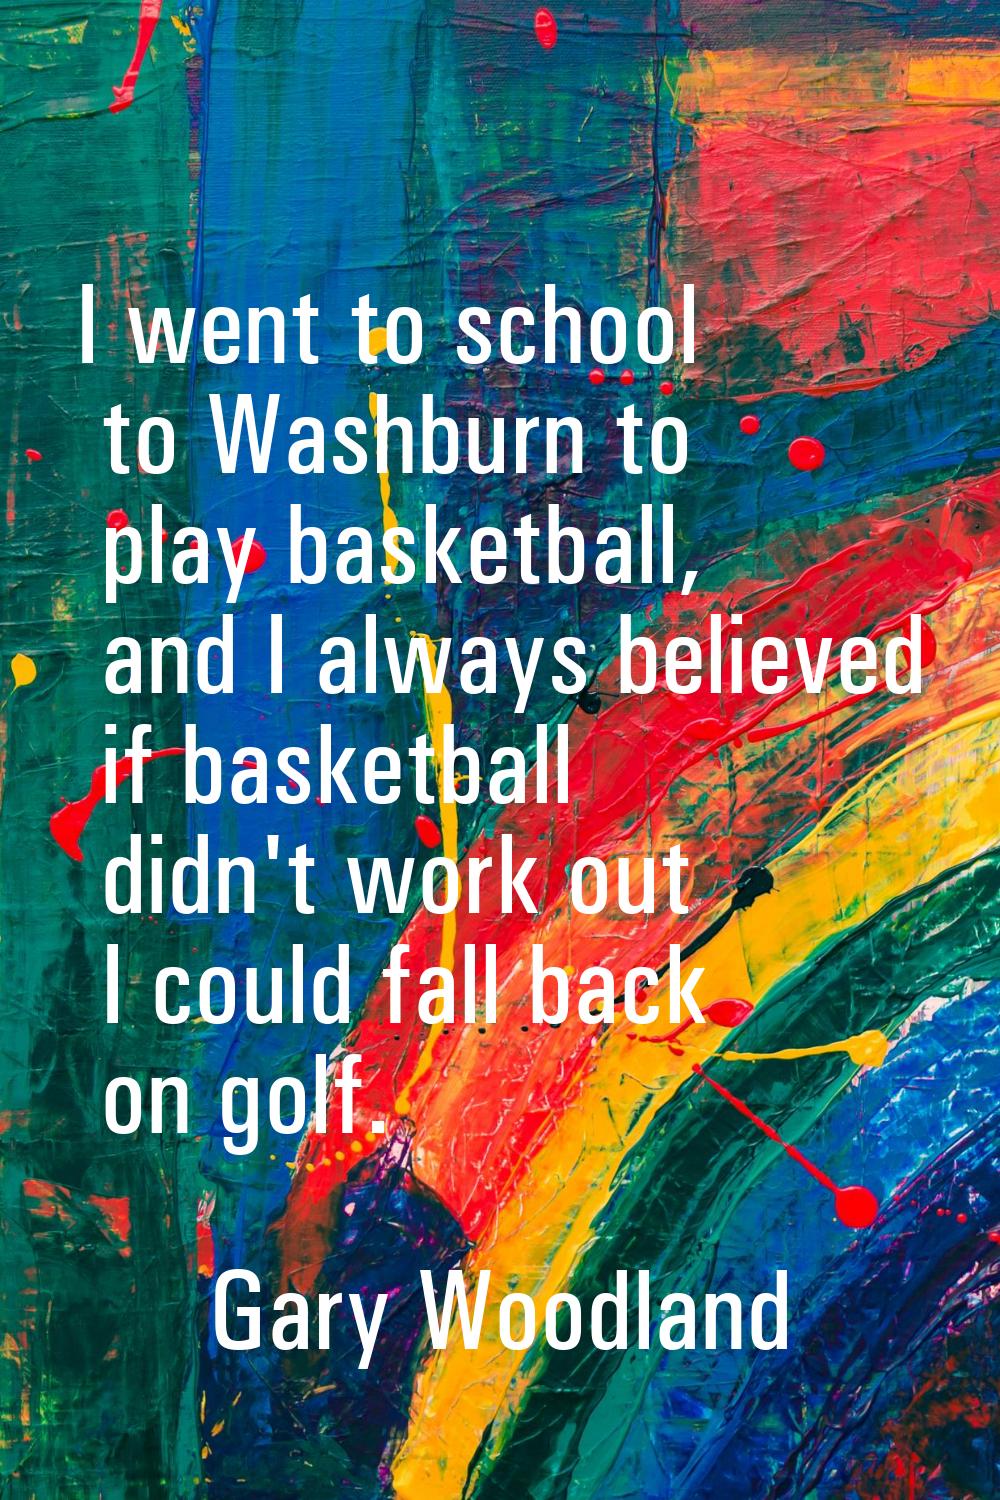 I went to school to Washburn to play basketball, and I always believed if basketball didn't work ou